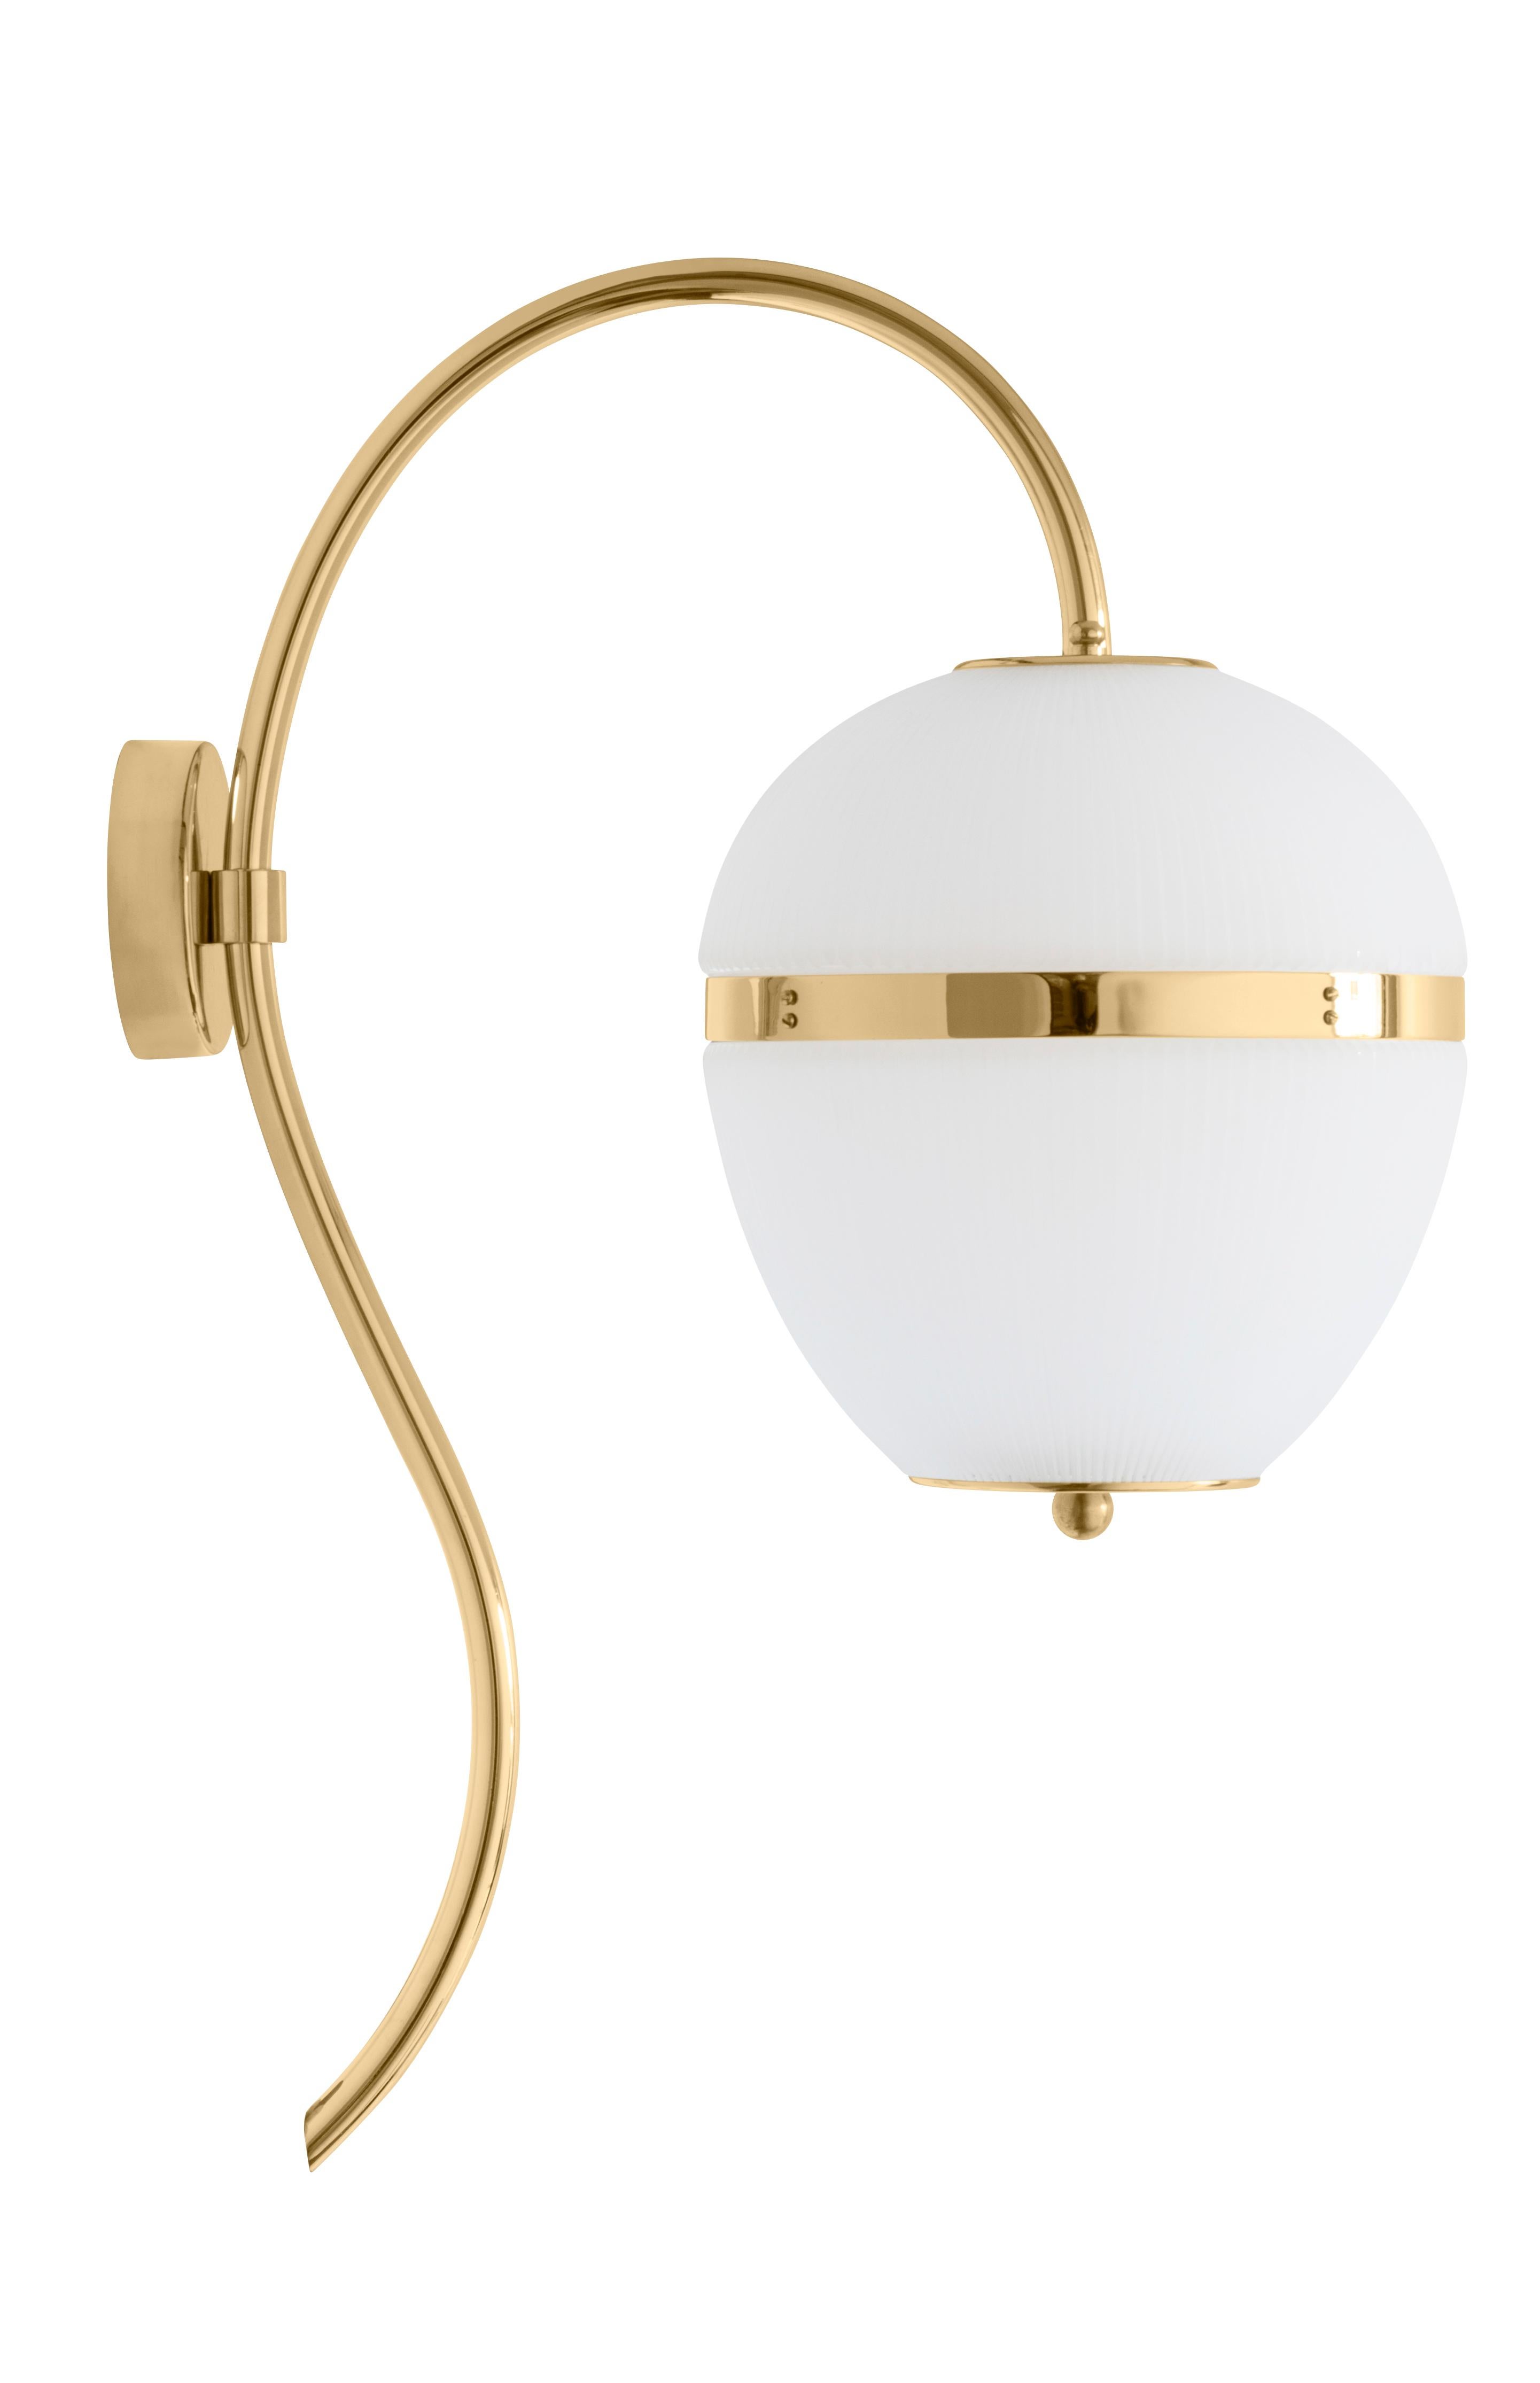 Wall lamp China 02 by Magic Circus Editions.
Dimensions: H 62 x W 25 x D 41.5 cm.
Materials: brass, mouth blown glass sculpted with a diamond saw.
Colour: enamel soft white.

Available finishes: brass, nickel.

All our lamps can be wired